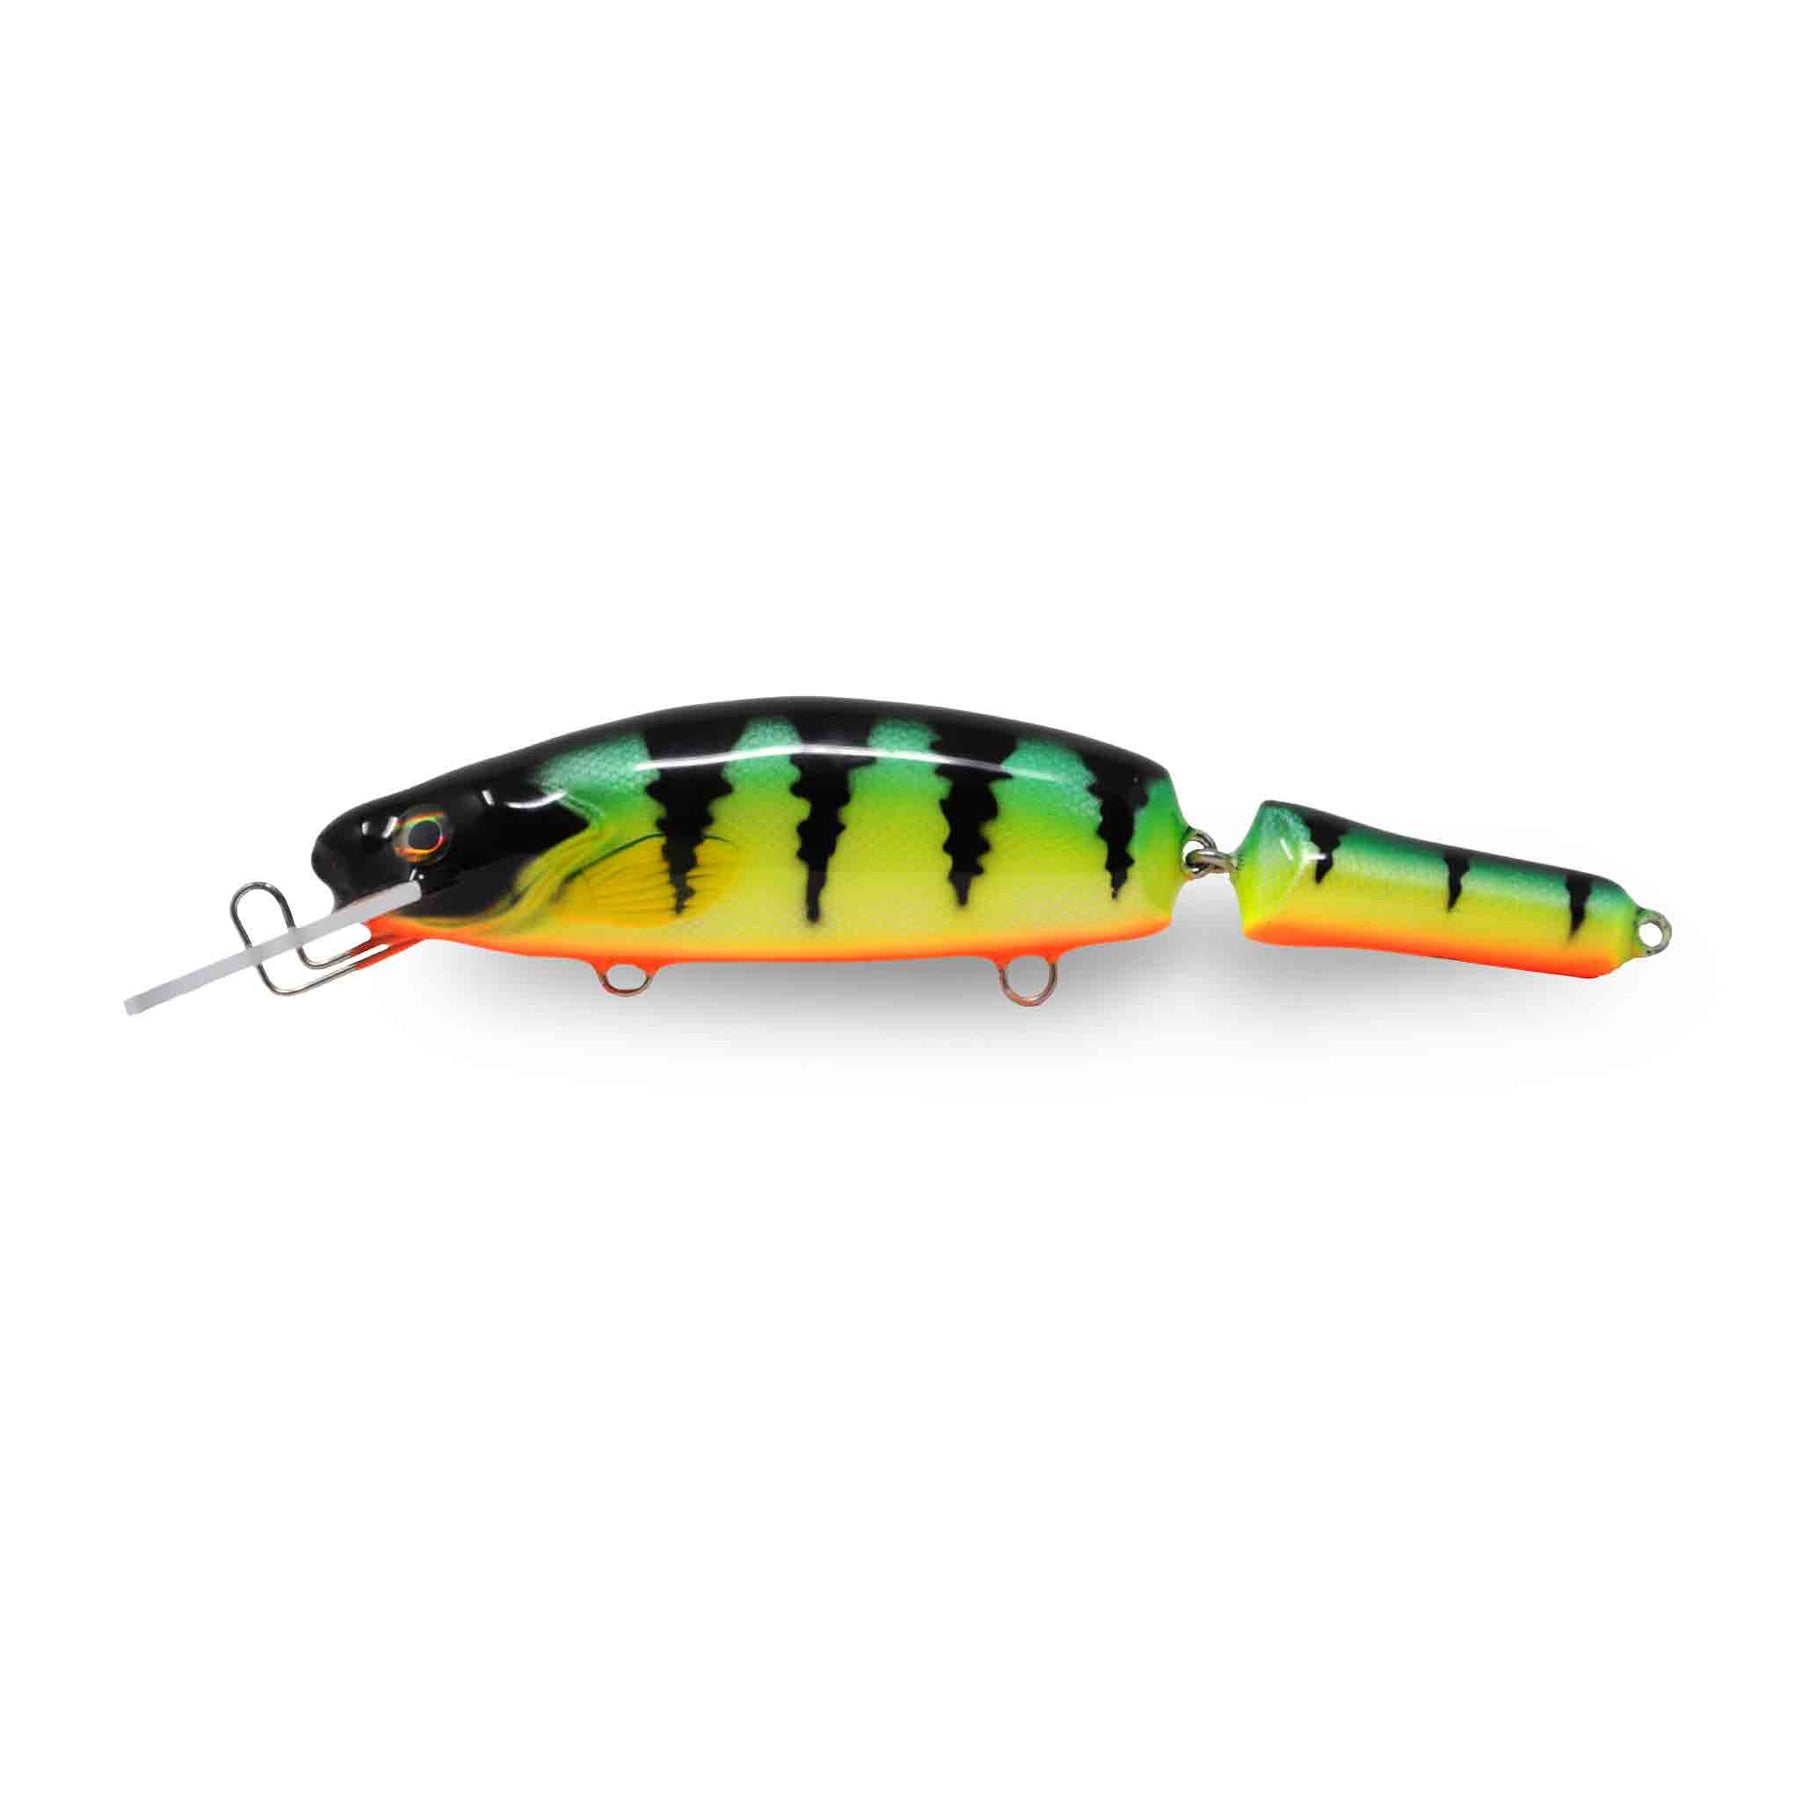 Boomstick Jointed Shallow Lac Seul Perch Crankbaits